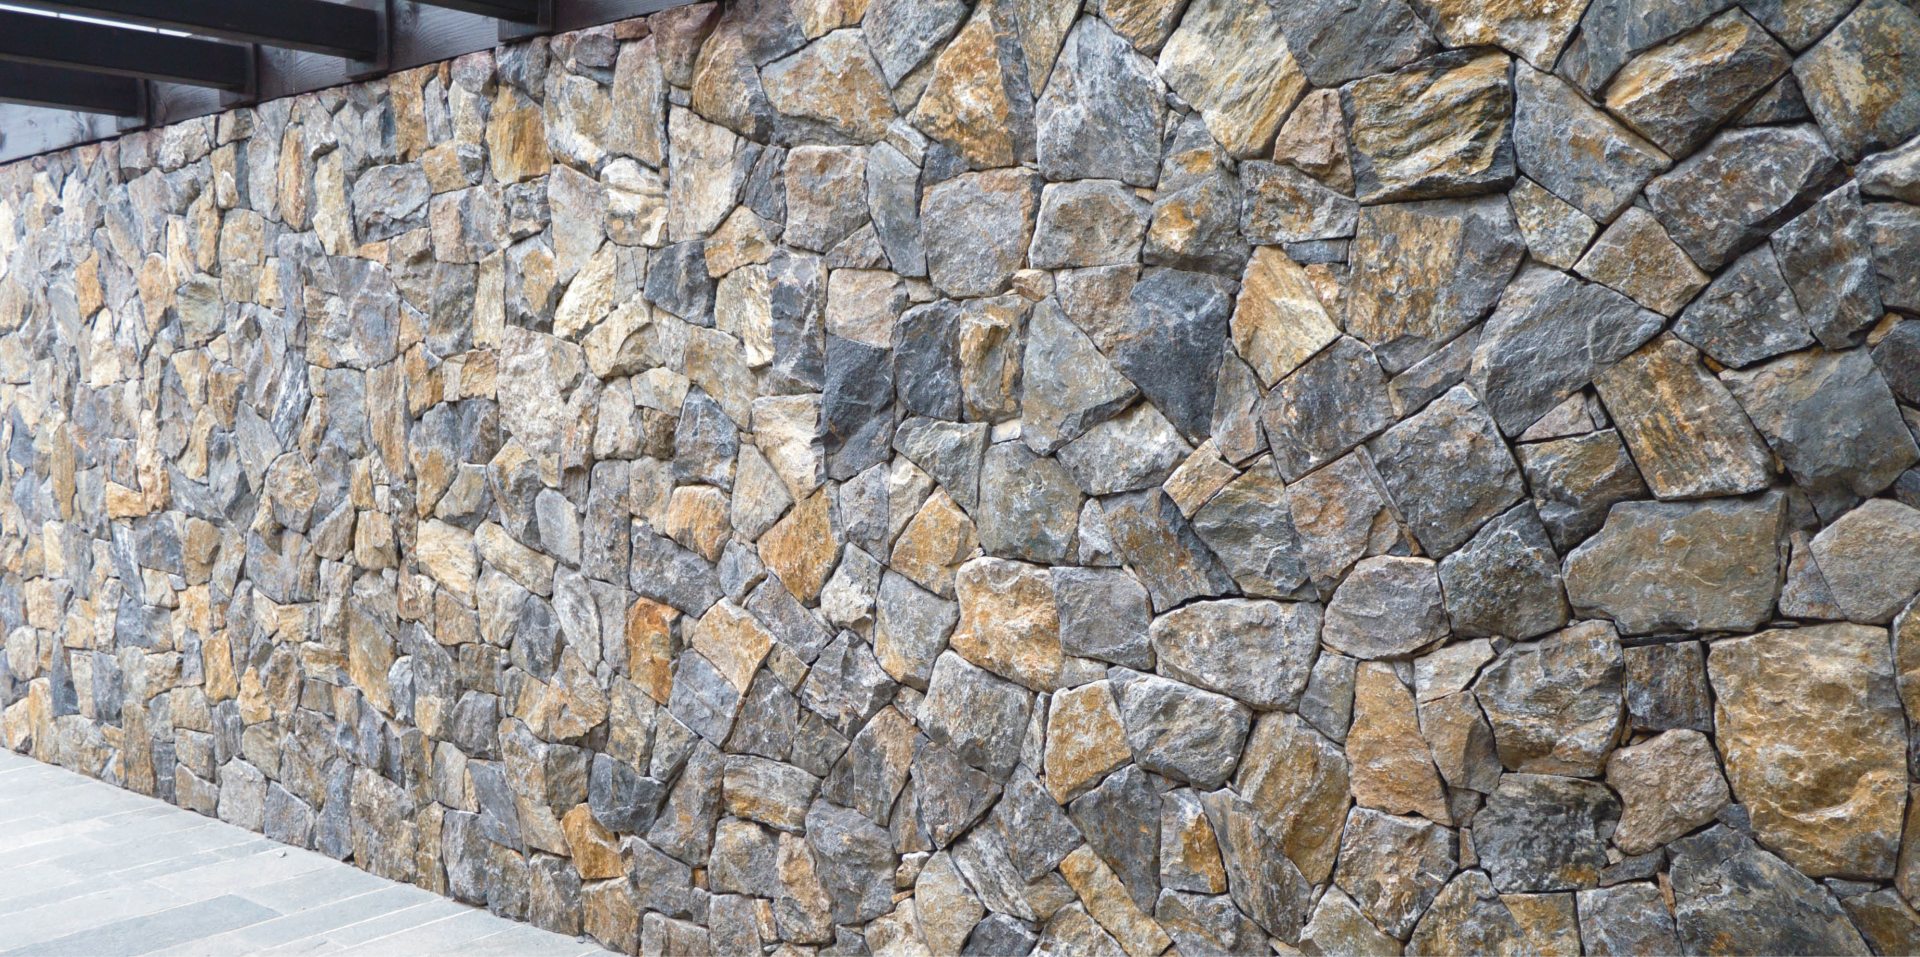 Tundra Rock Face by ErthCoverings